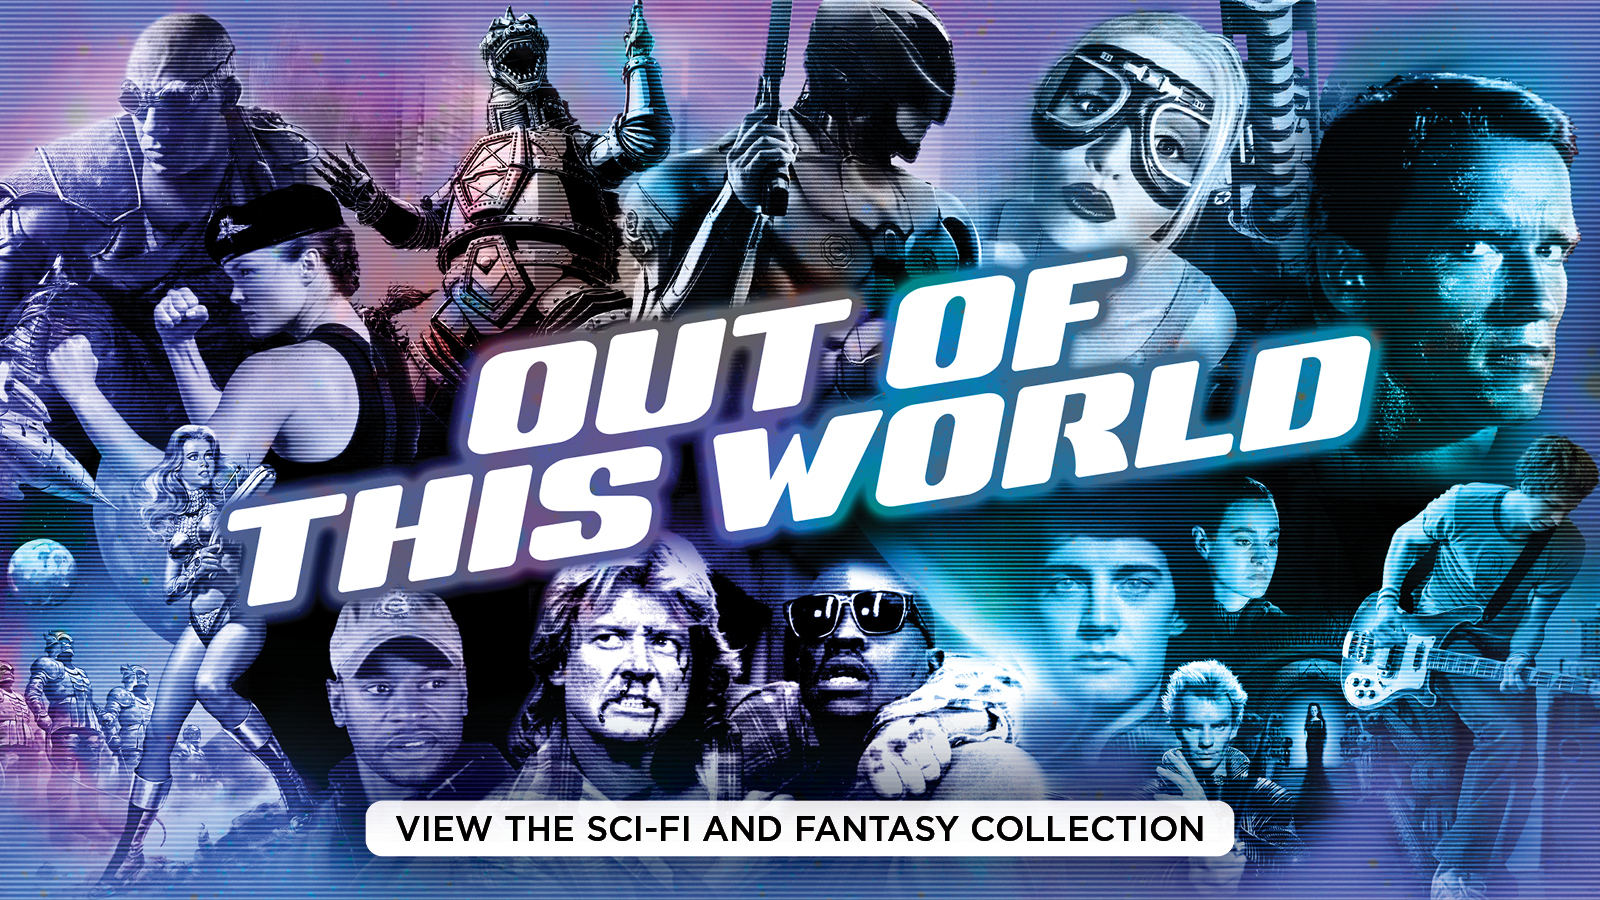 Out of this World – View the sci fi and fantasy collection